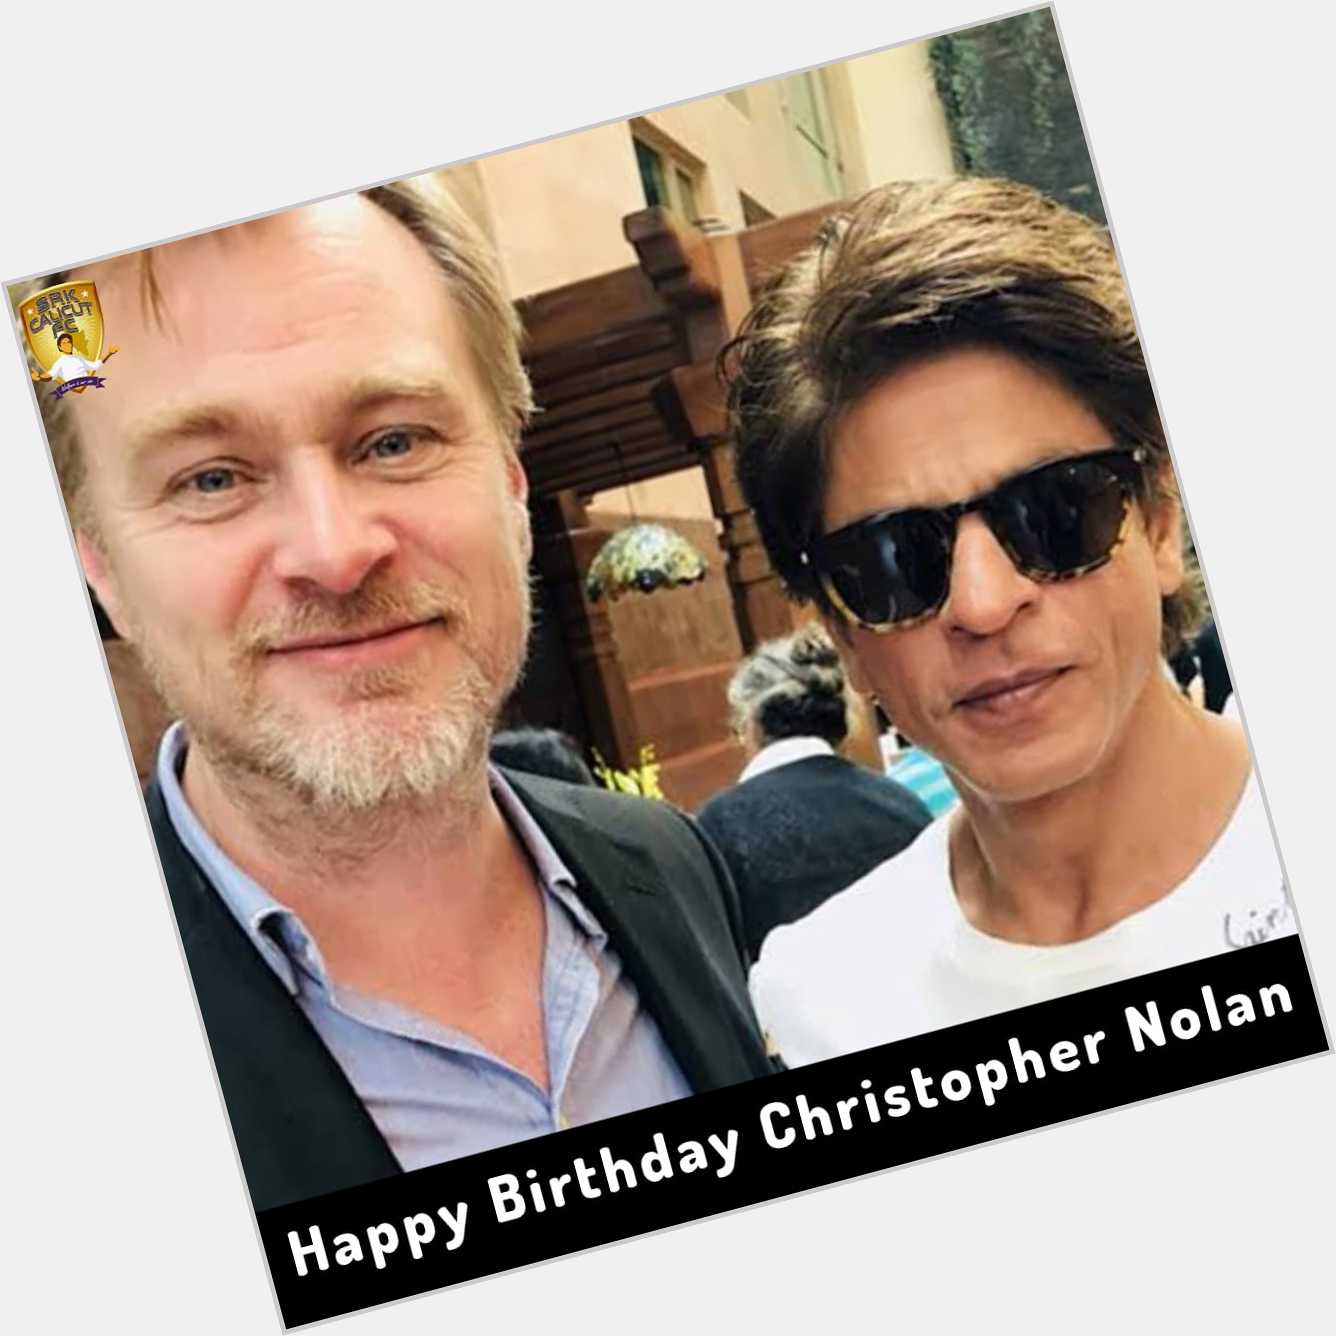 Wishing a Happy Birthday to the Legendary Director Christopher Nolan 